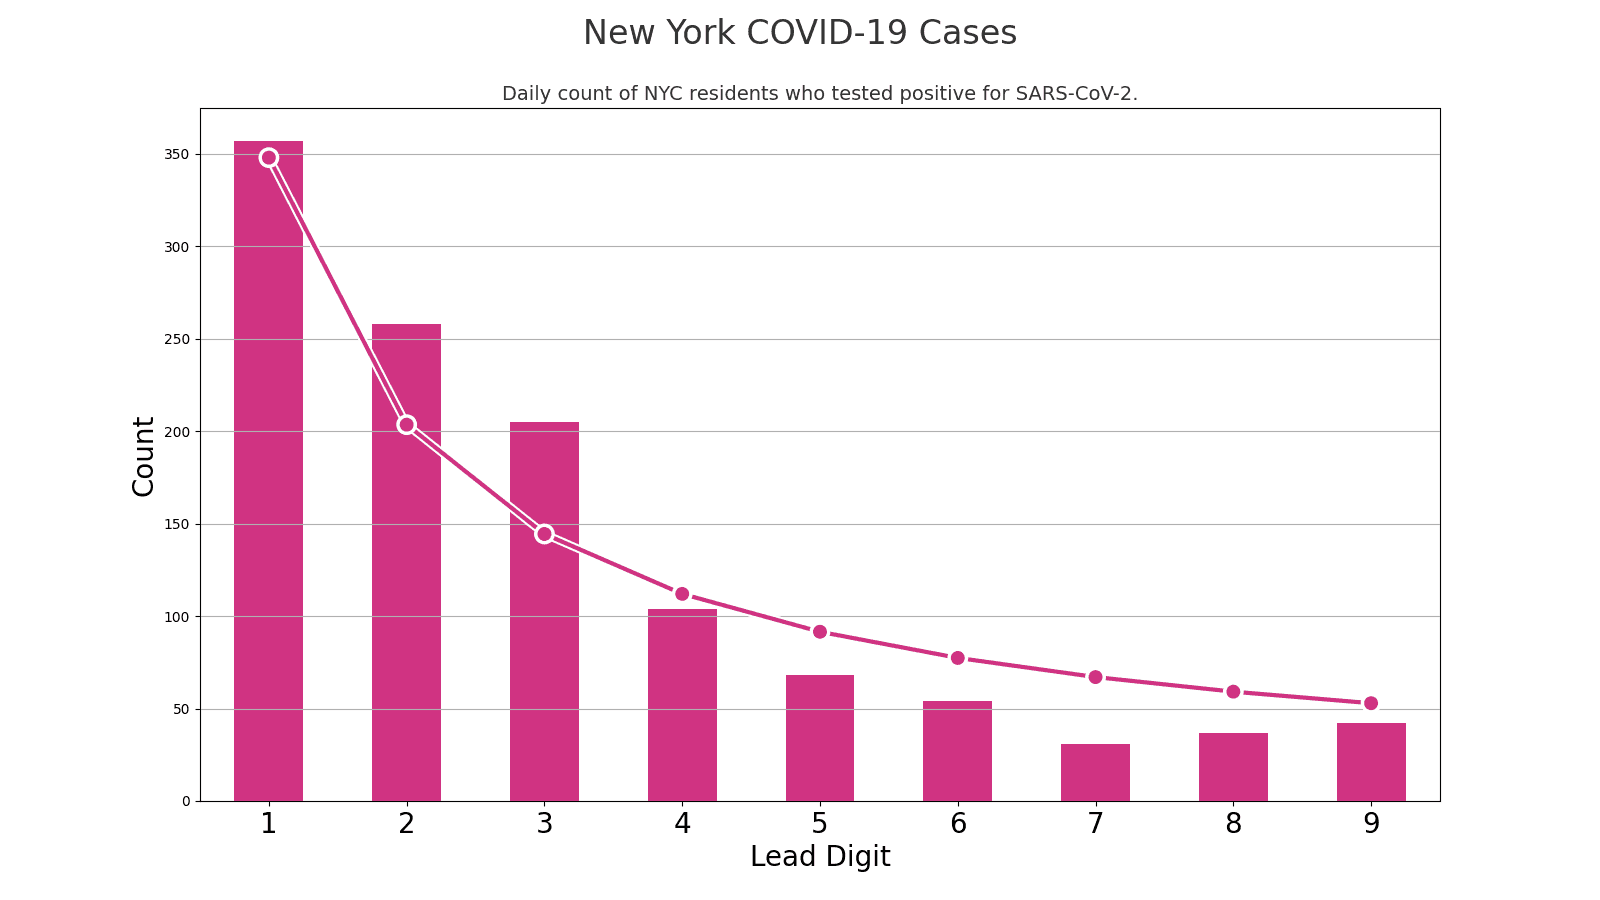 The distribution of lead digits from NYC daily COVID-19 case counts.